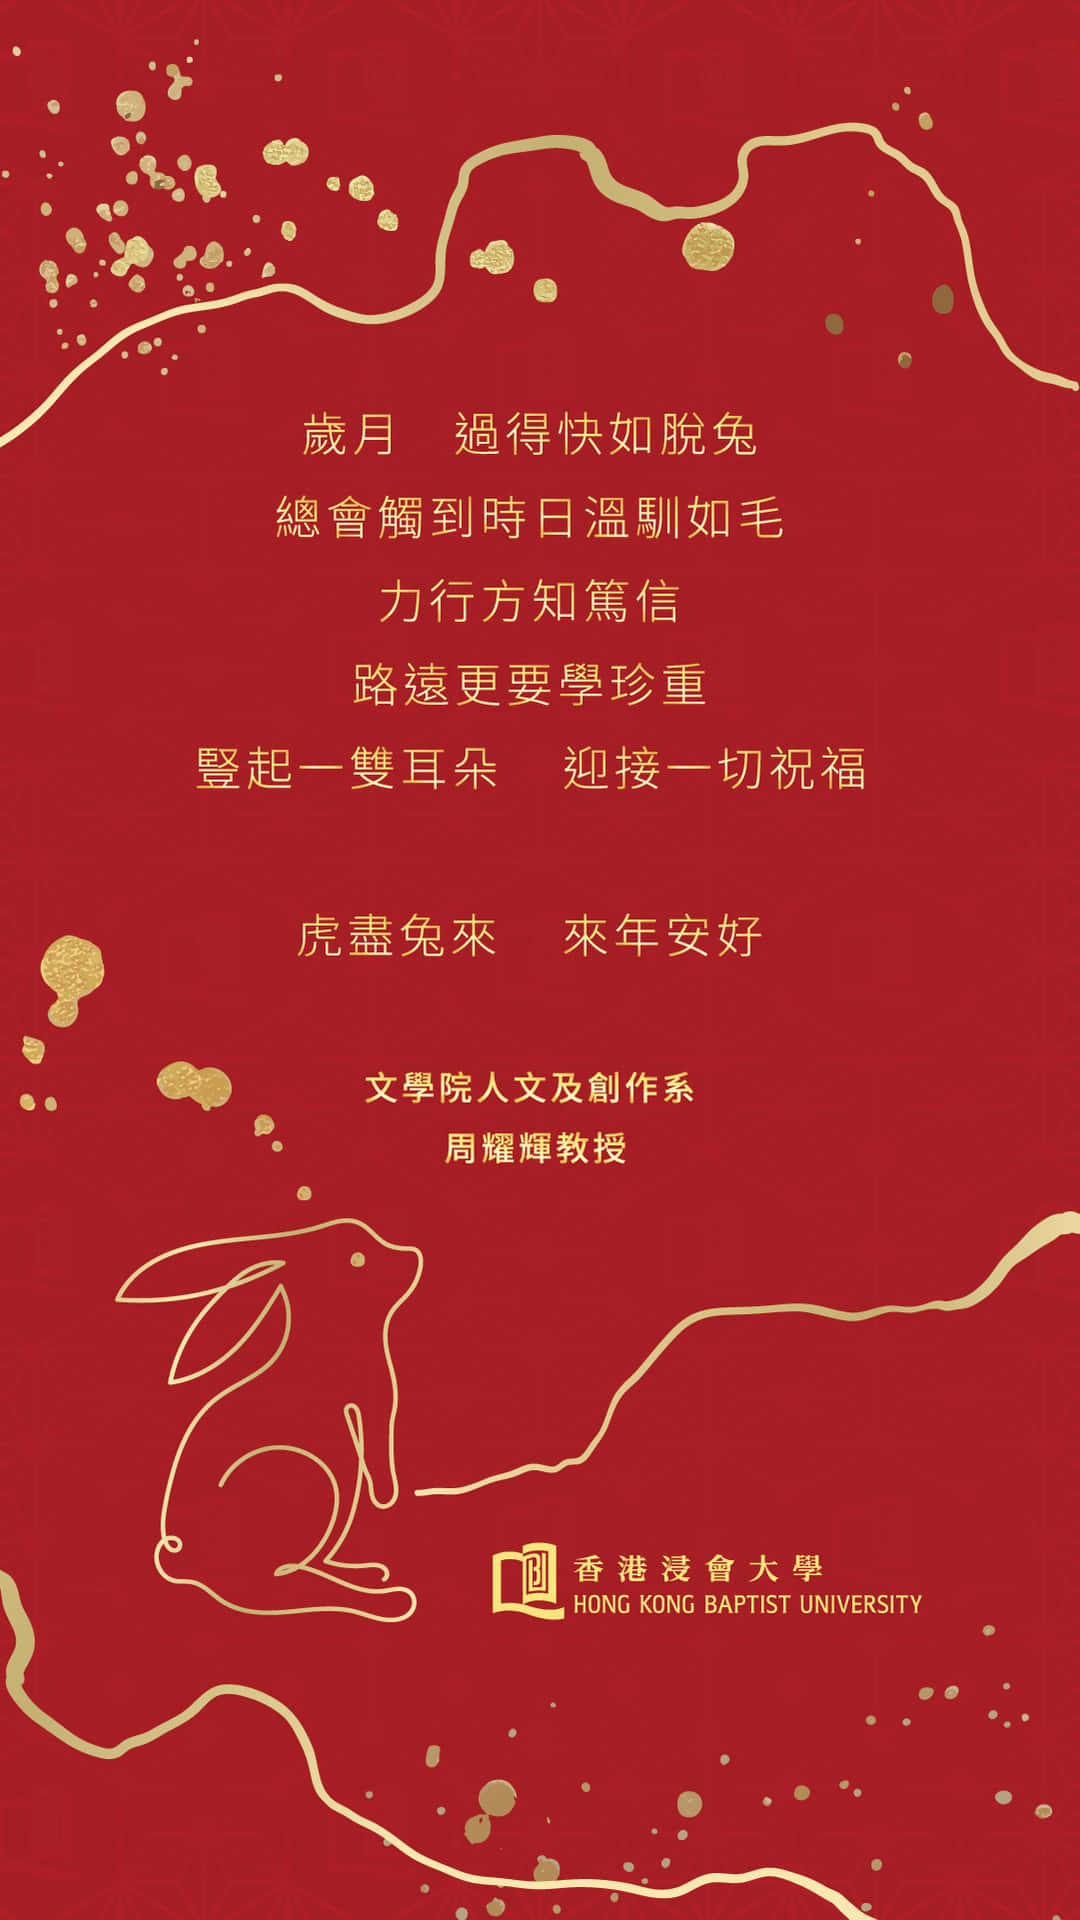 Chinese New Year Greeting Card With A Rabbit Wallpaper